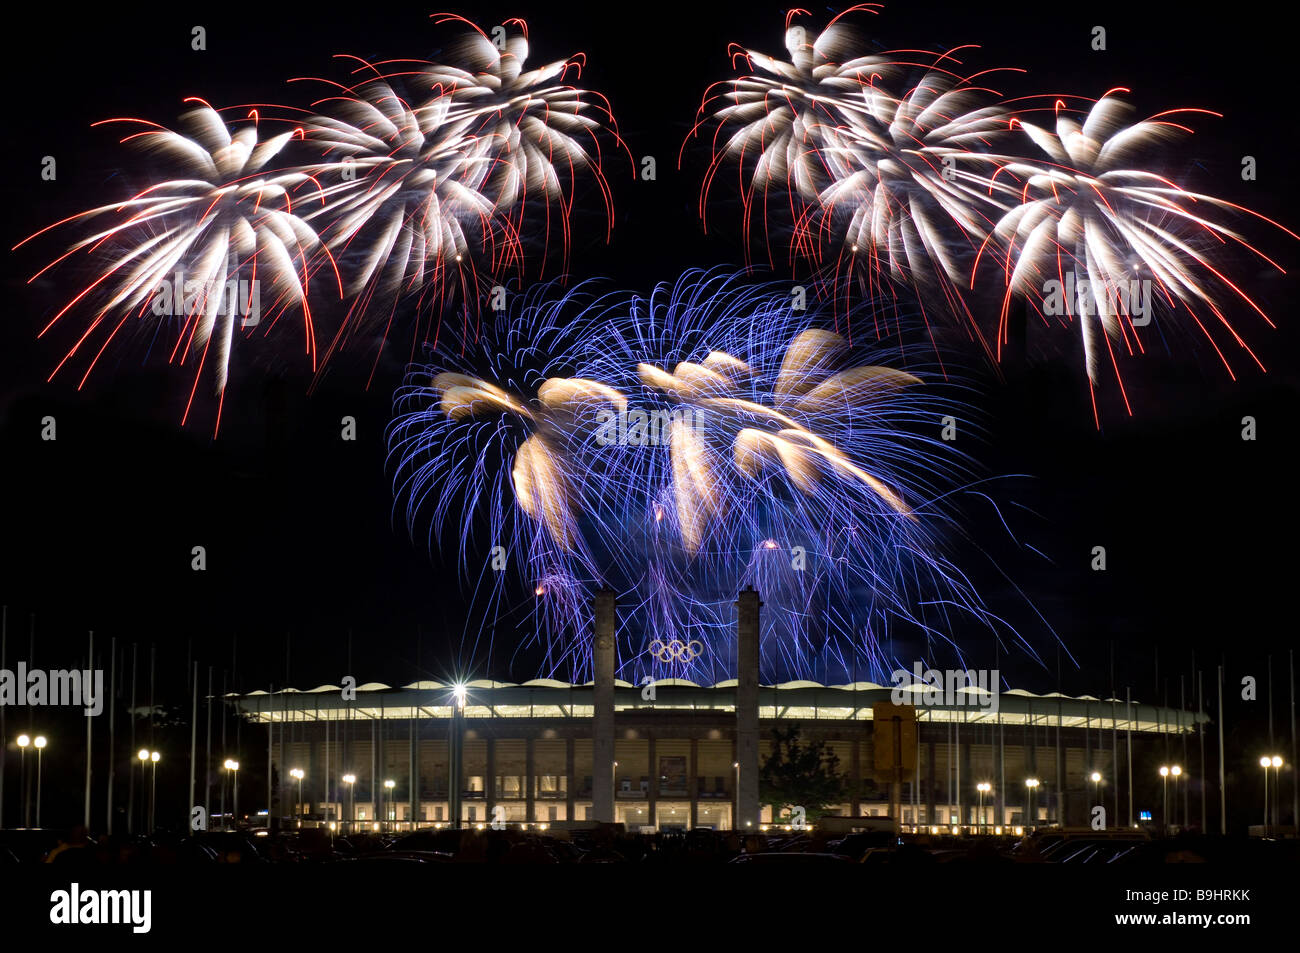 Fireworks over the Berlin Olympic Stadium for the Pyronale, World